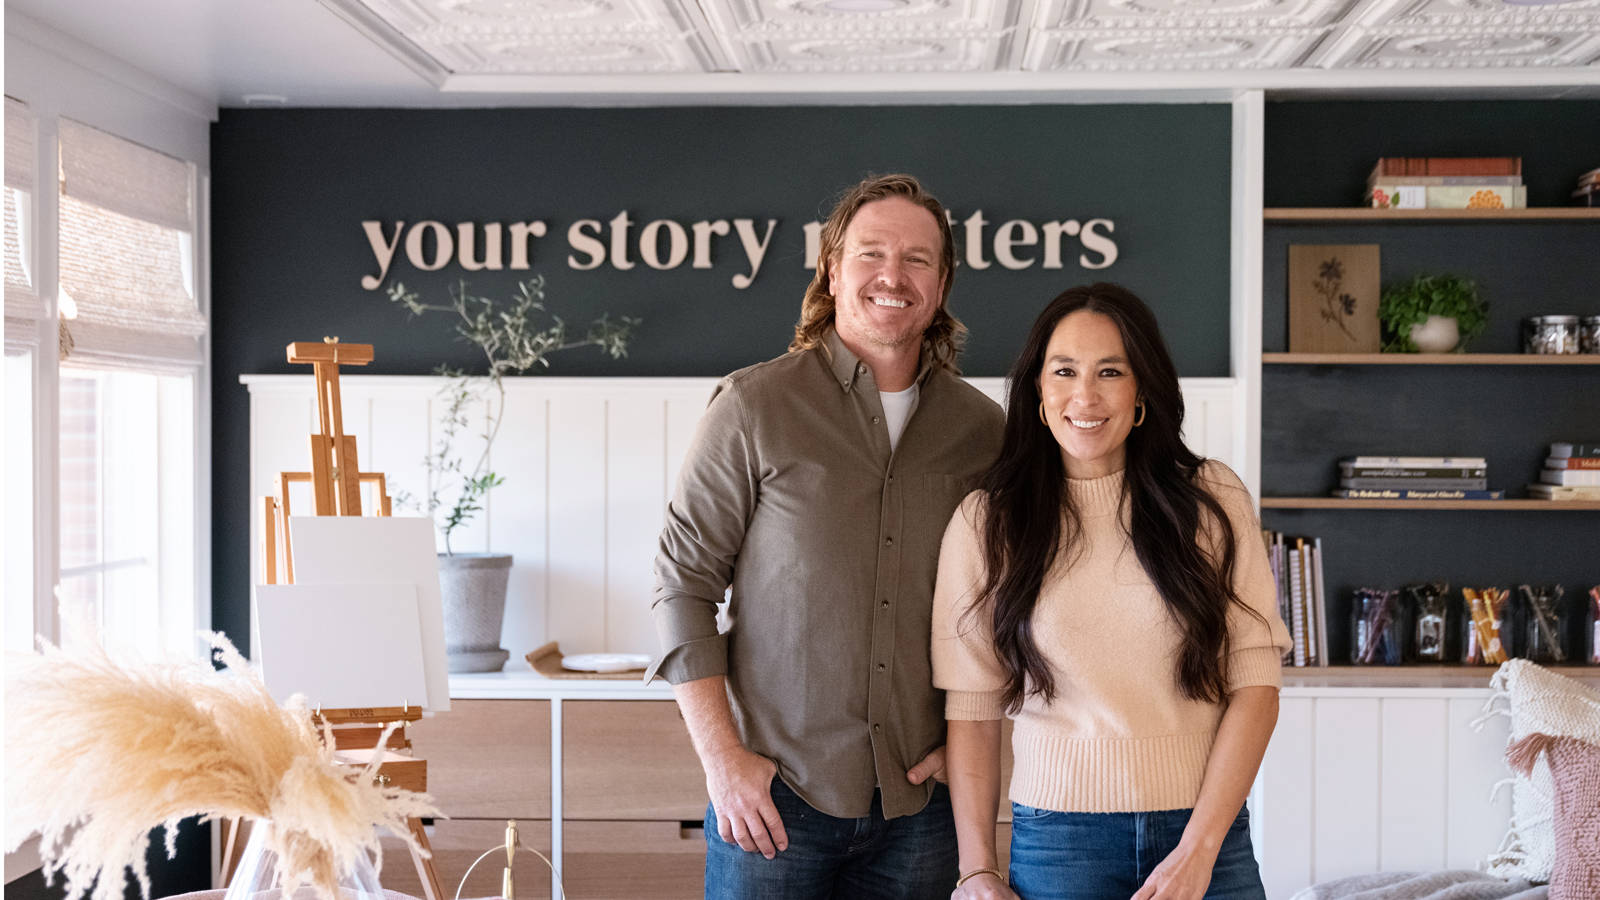 Joanna Gaines with her husband Chip Gaines on the set of Fixer Upper. Wallpaper